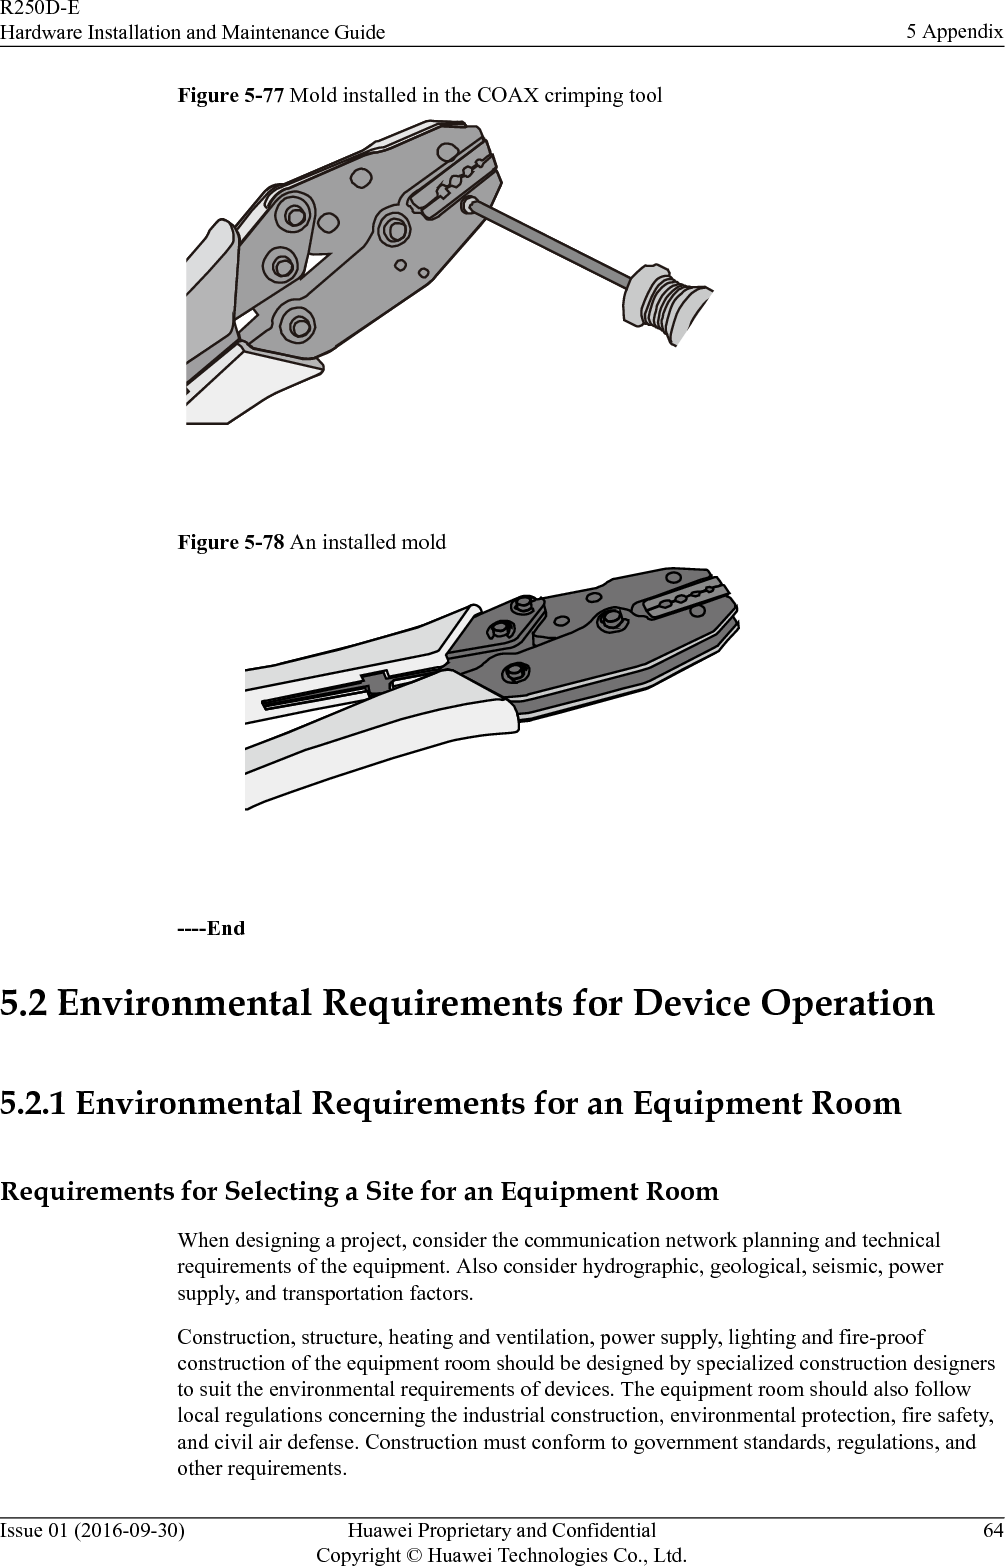 Figure 5-77 Mold installed in the COAX crimping tool Figure 5-78 An installed mold ----End5.2 Environmental Requirements for Device Operation5.2.1 Environmental Requirements for an Equipment RoomRequirements for Selecting a Site for an Equipment RoomWhen designing a project, consider the communication network planning and technicalrequirements of the equipment. Also consider hydrographic, geological, seismic, powersupply, and transportation factors.Construction, structure, heating and ventilation, power supply, lighting and fire-proofconstruction of the equipment room should be designed by specialized construction designersto suit the environmental requirements of devices. The equipment room should also followlocal regulations concerning the industrial construction, environmental protection, fire safety,and civil air defense. Construction must conform to government standards, regulations, andother requirements.R250D-EHardware Installation and Maintenance Guide 5 AppendixIssue 01 (2016-09-30) Huawei Proprietary and ConfidentialCopyright © Huawei Technologies Co., Ltd.64